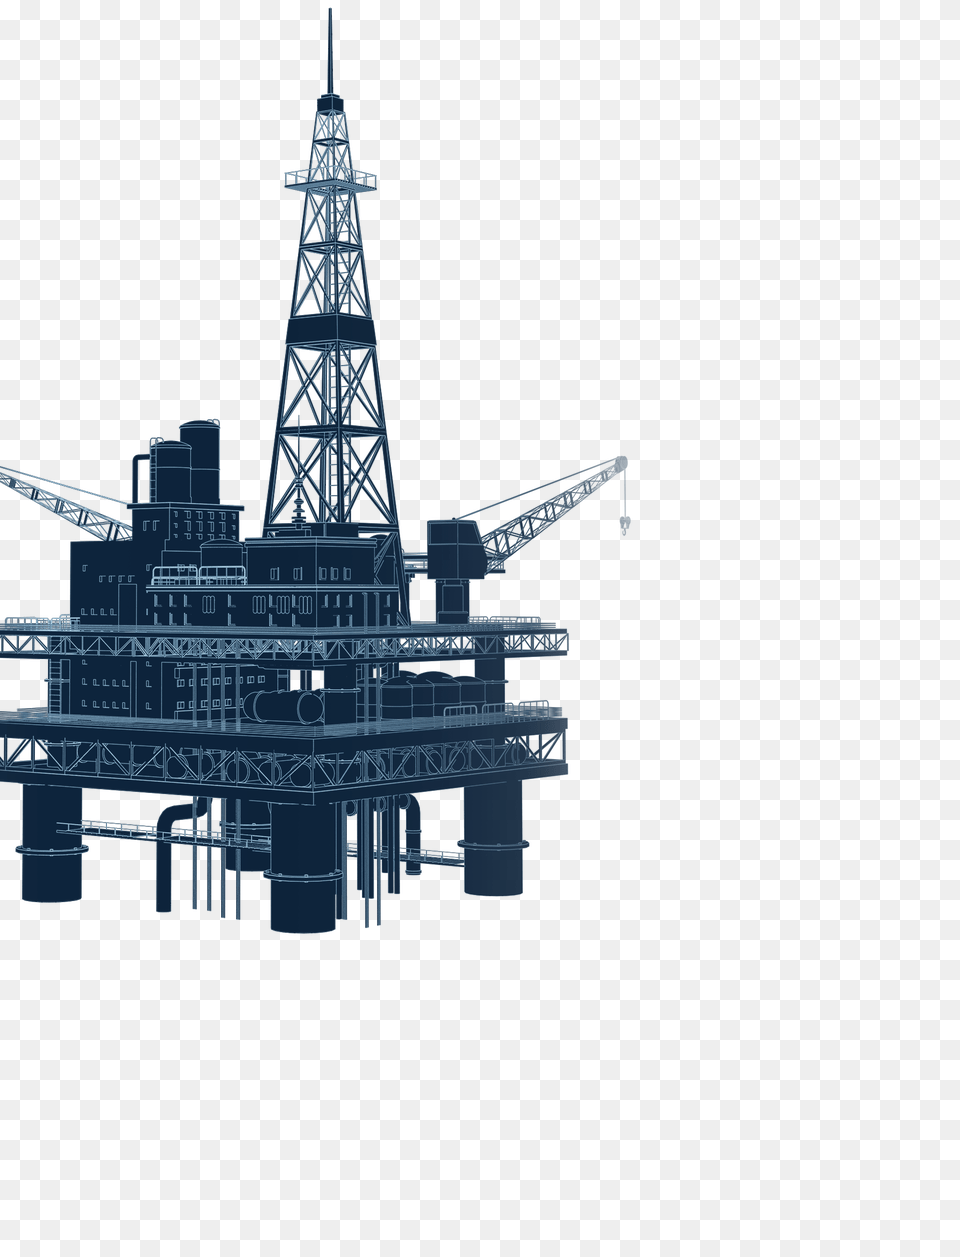 Download Offshore Products Oil Rig Background, Outdoors, Construction, Architecture, Building Png Image